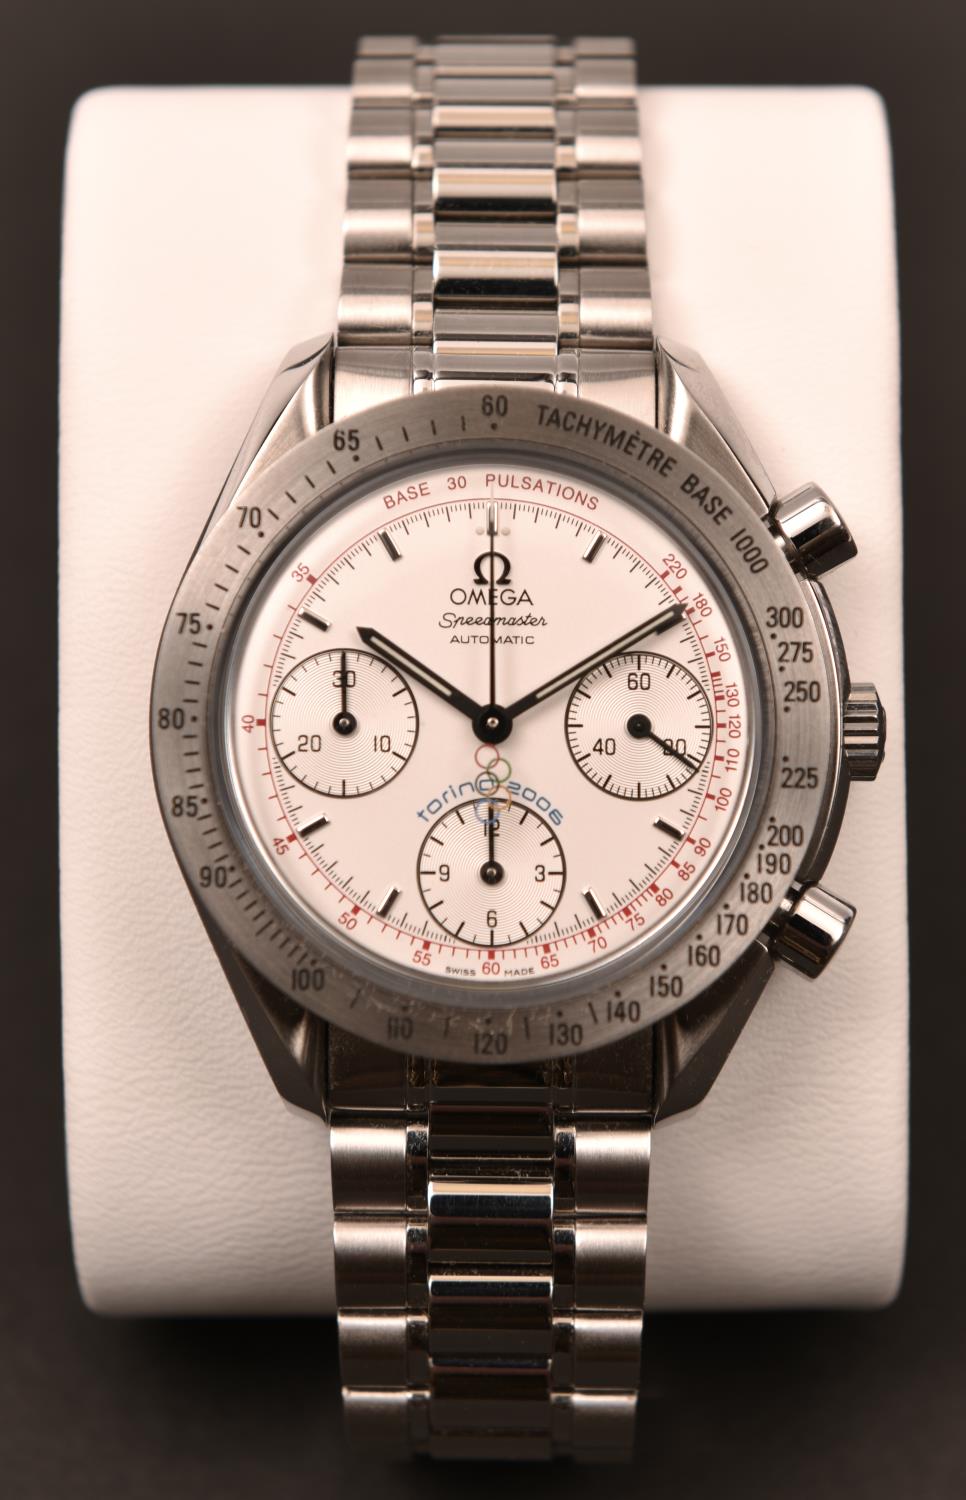 An Omega Speedmaster Chronograph Torino 2006 watch with automatic self winding mechanism. A